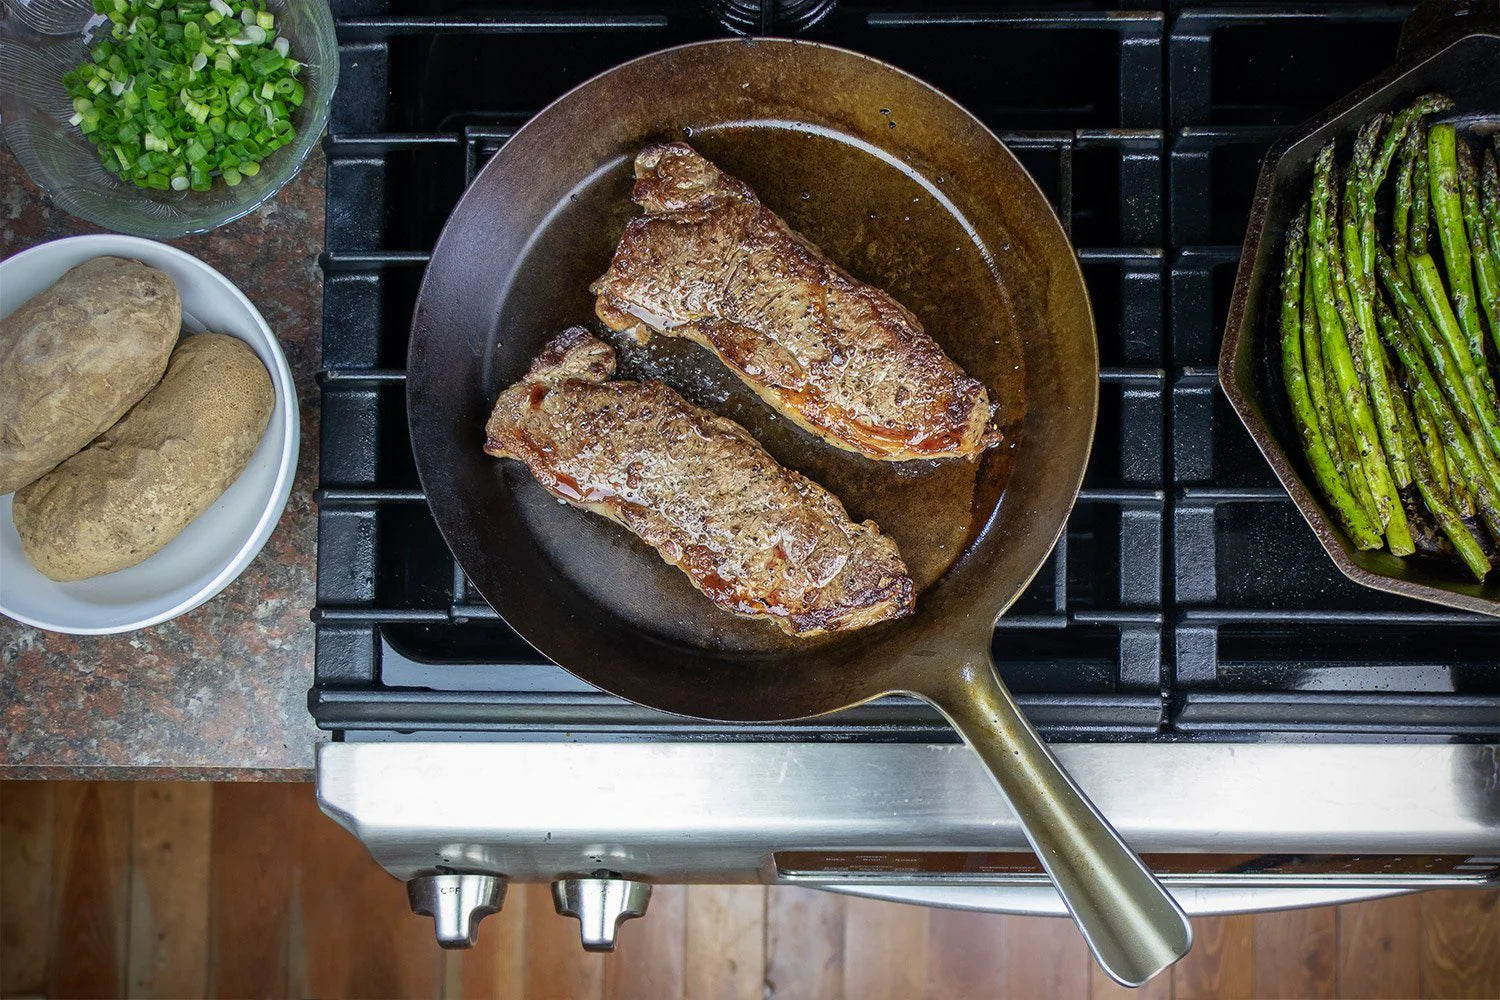 How to Use, Season, & Maintain Carbon Steel Pans